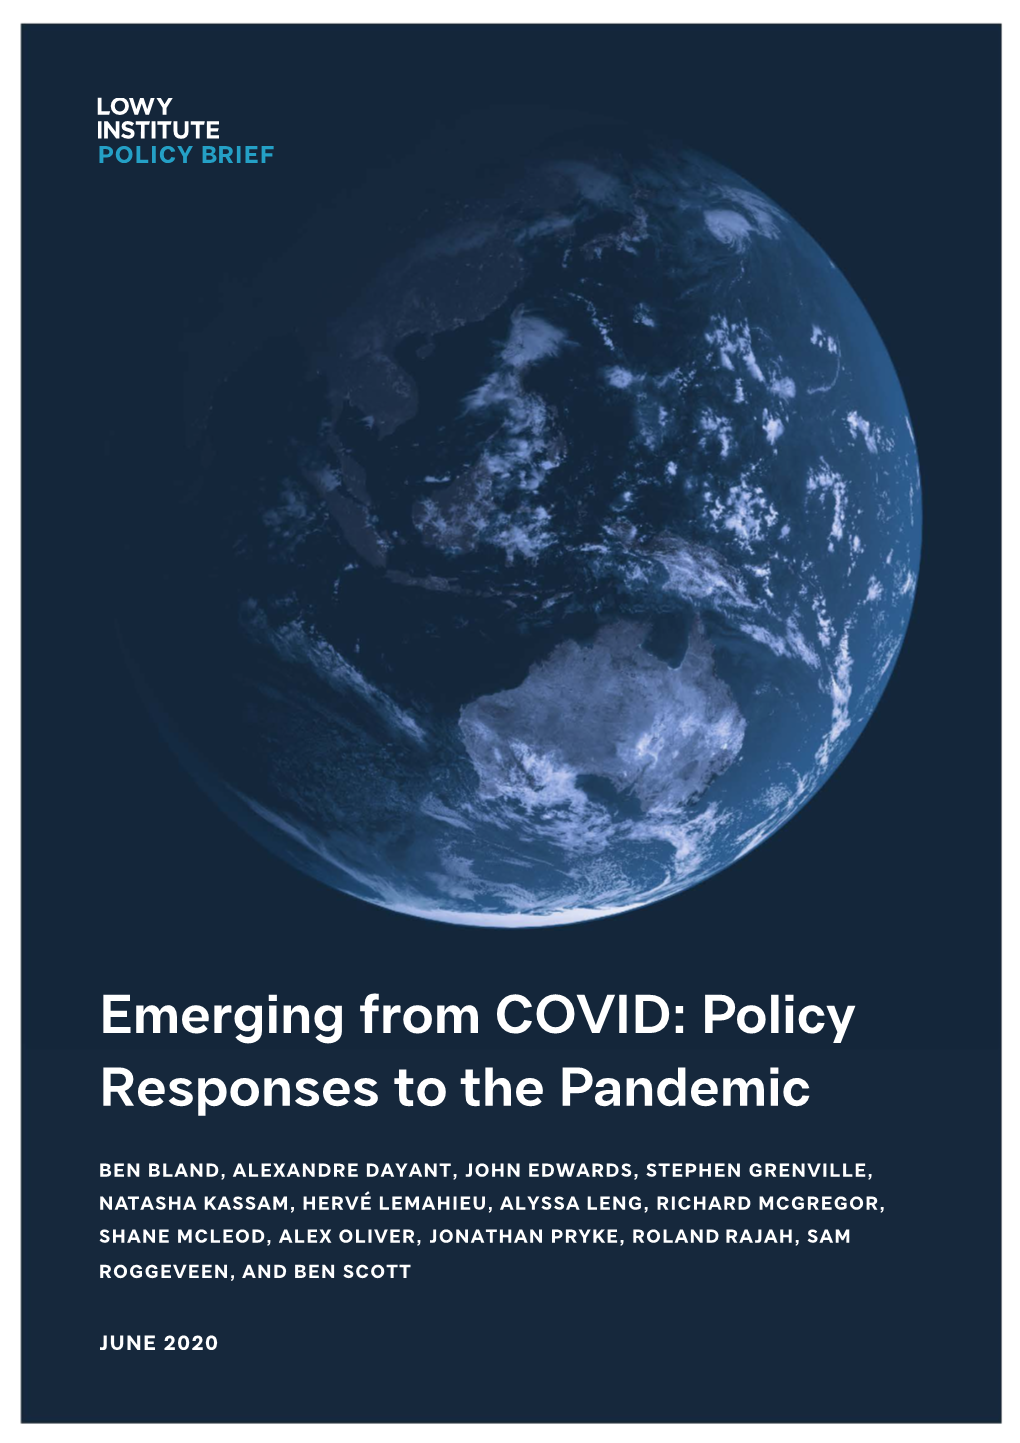 Emerging from COVID: Policy Responses to the Pandemic